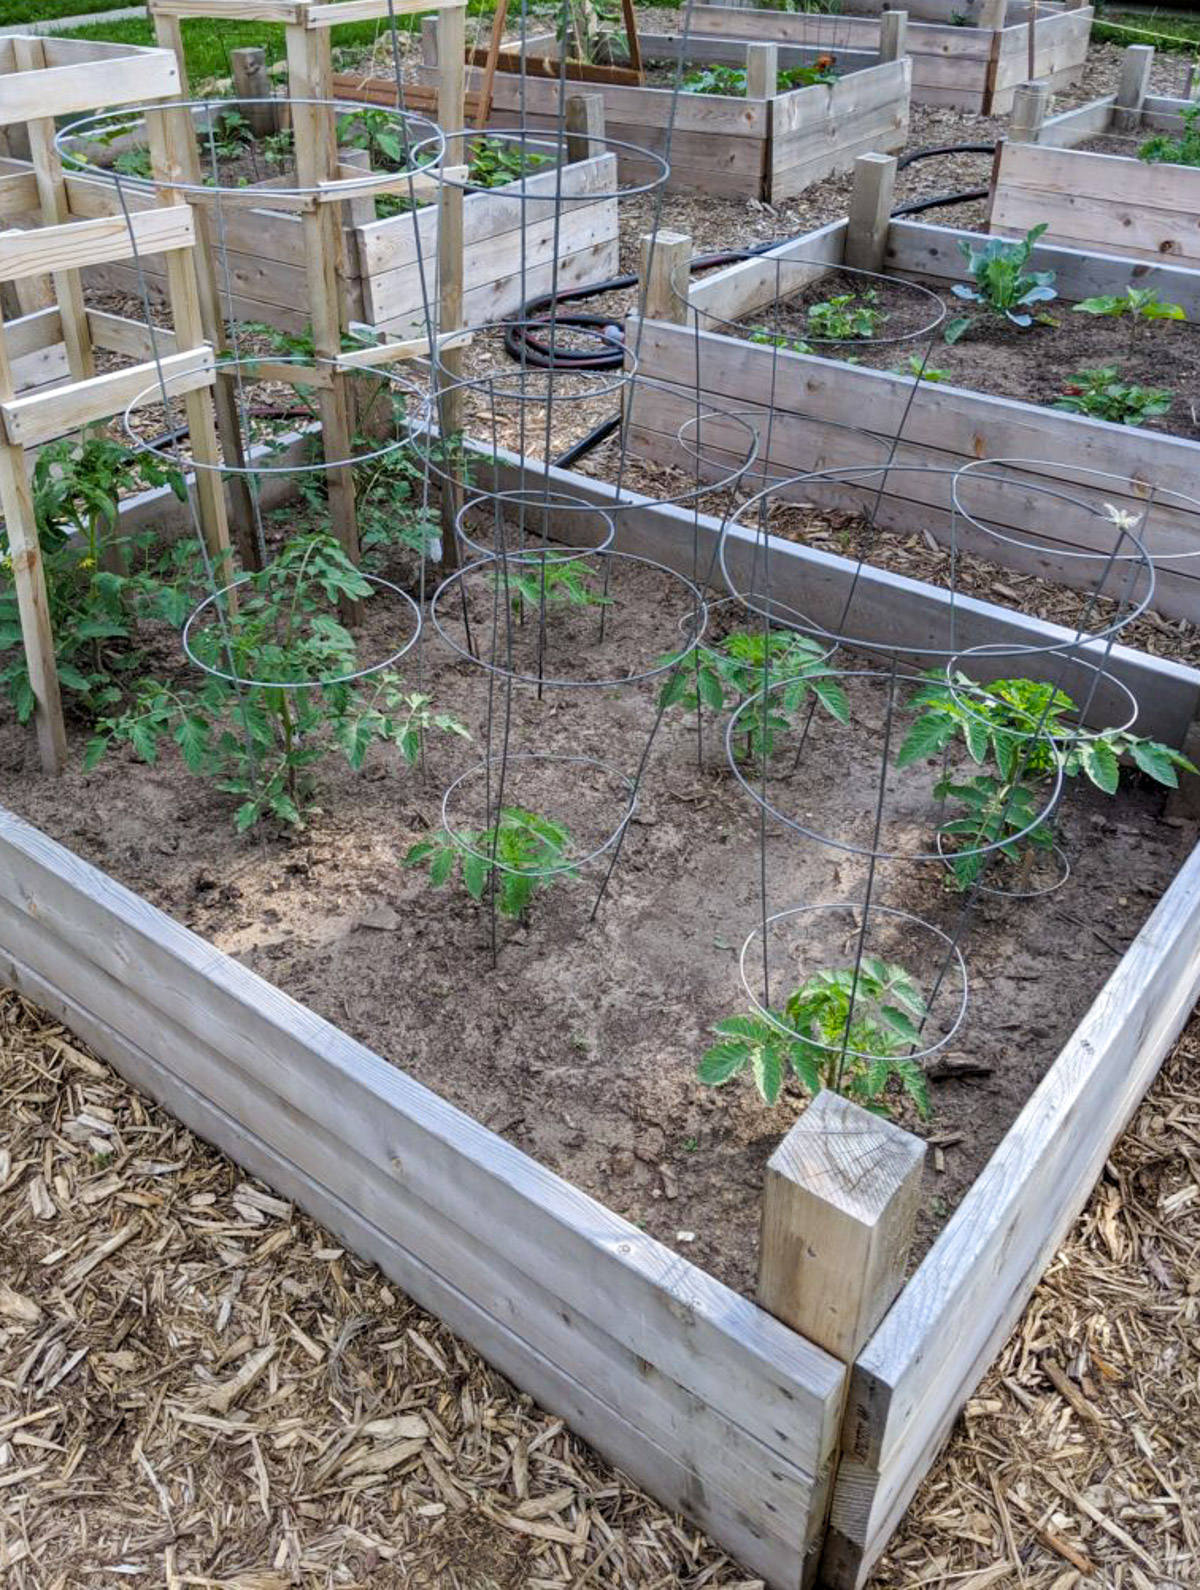 Vegetable raised bed gardens with tomato plants.